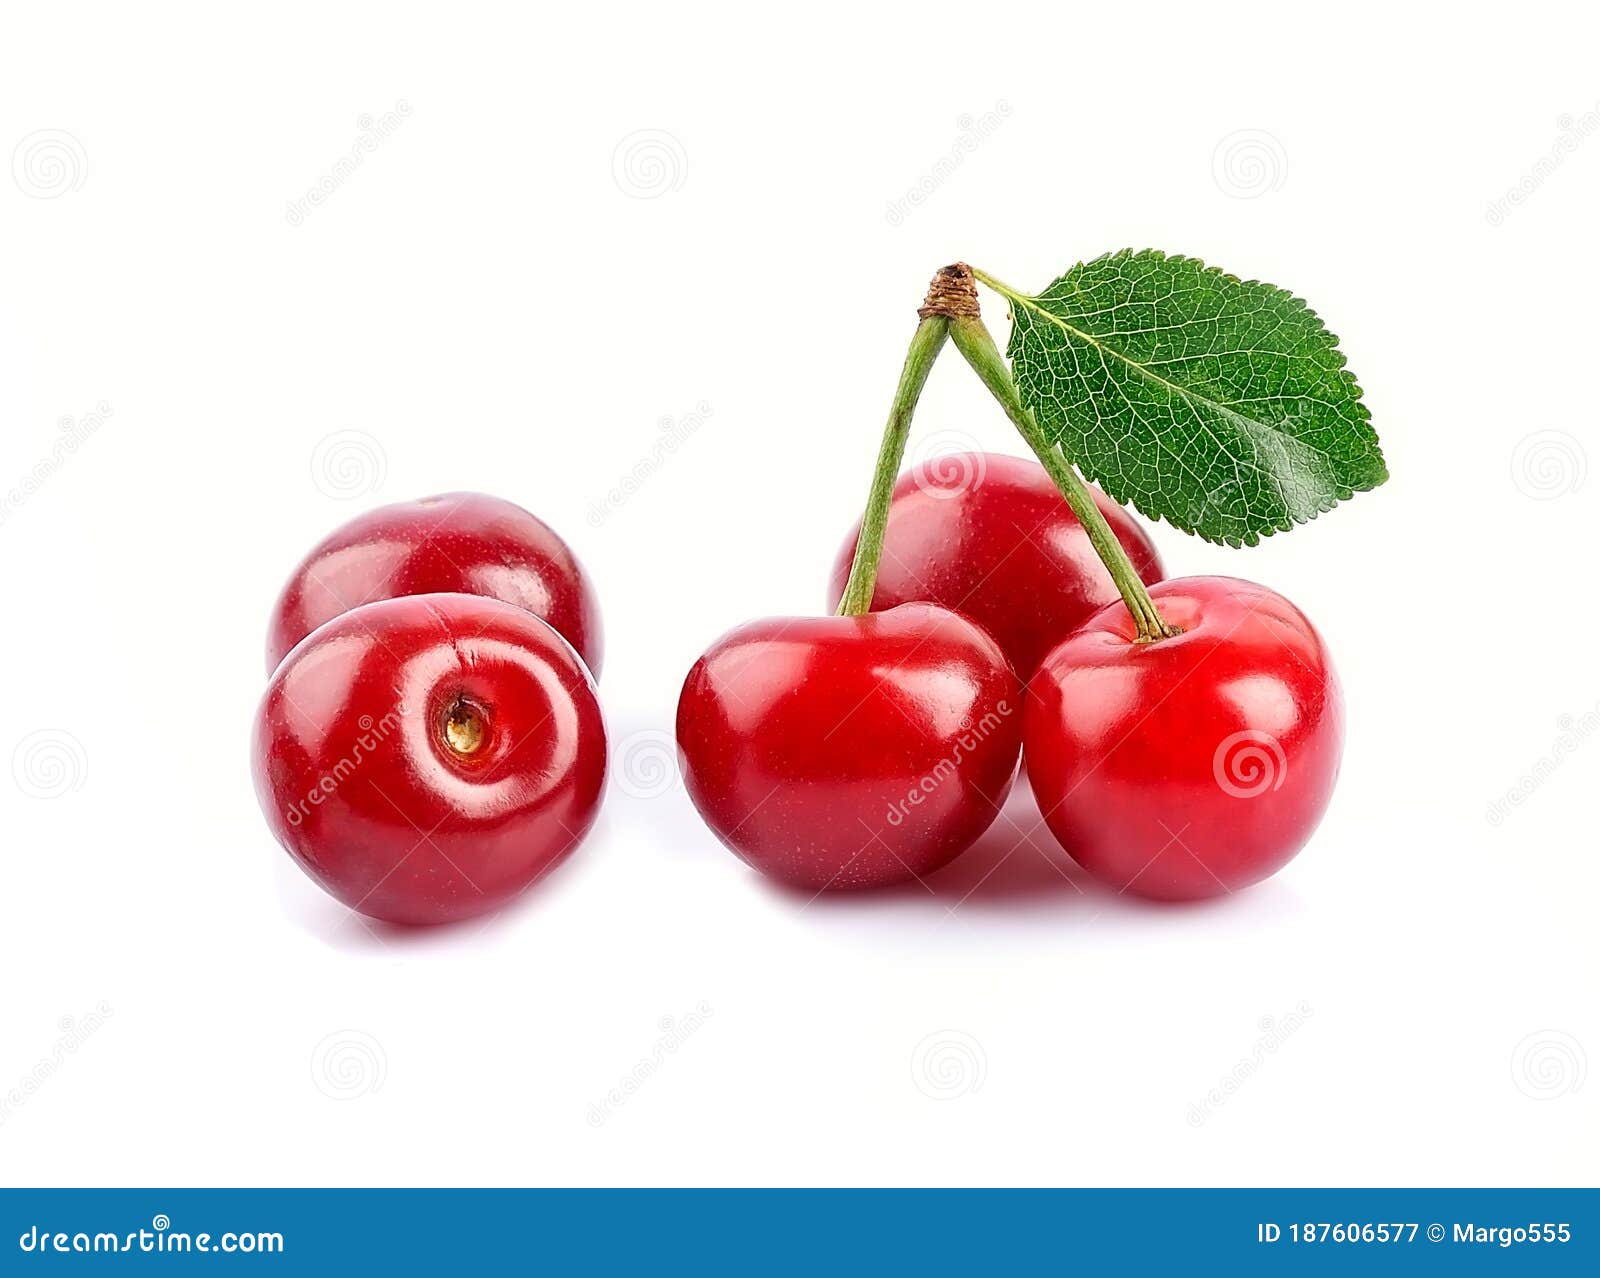 Sweet Cherry Berry with Leaves Stock Image - Image of amino ...